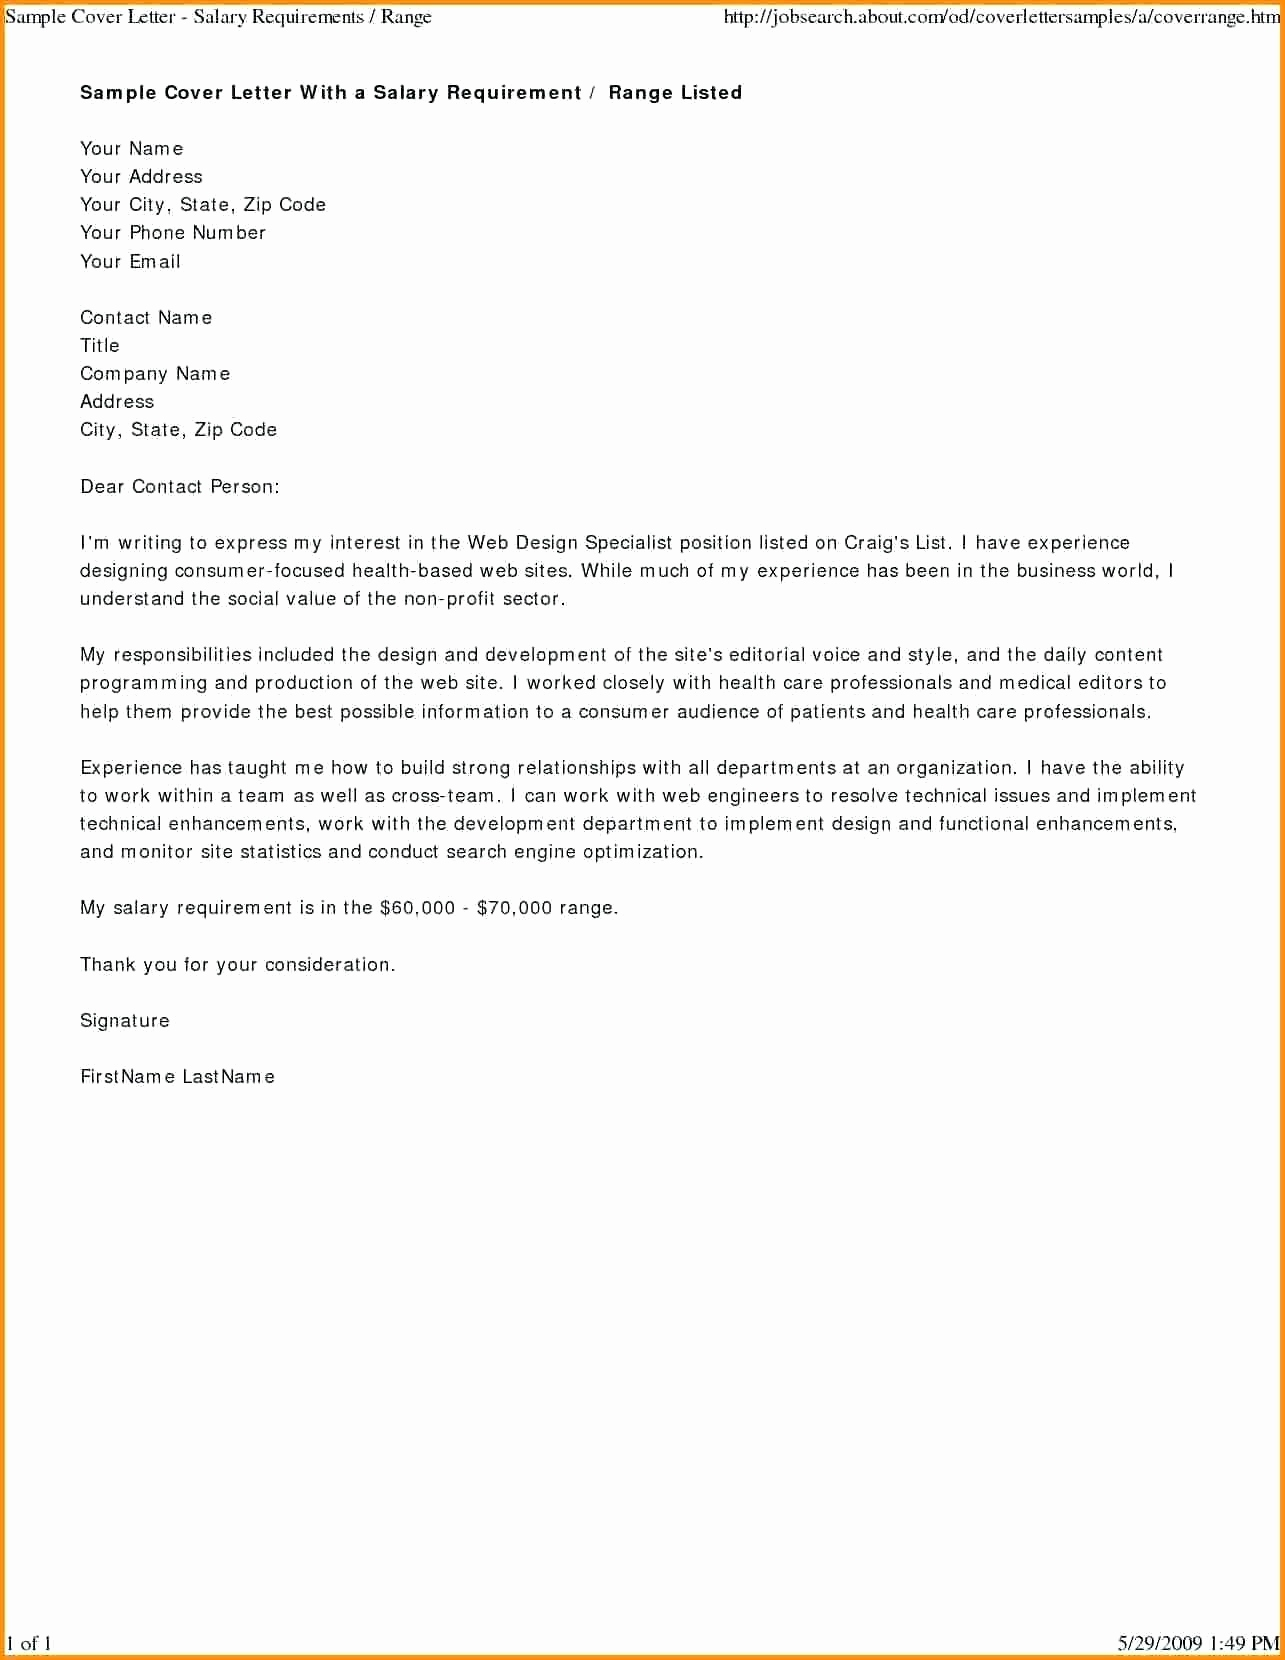 Side Letter Agreement Template - Side Letter Agreement Example New Live In Nanny Contract Template